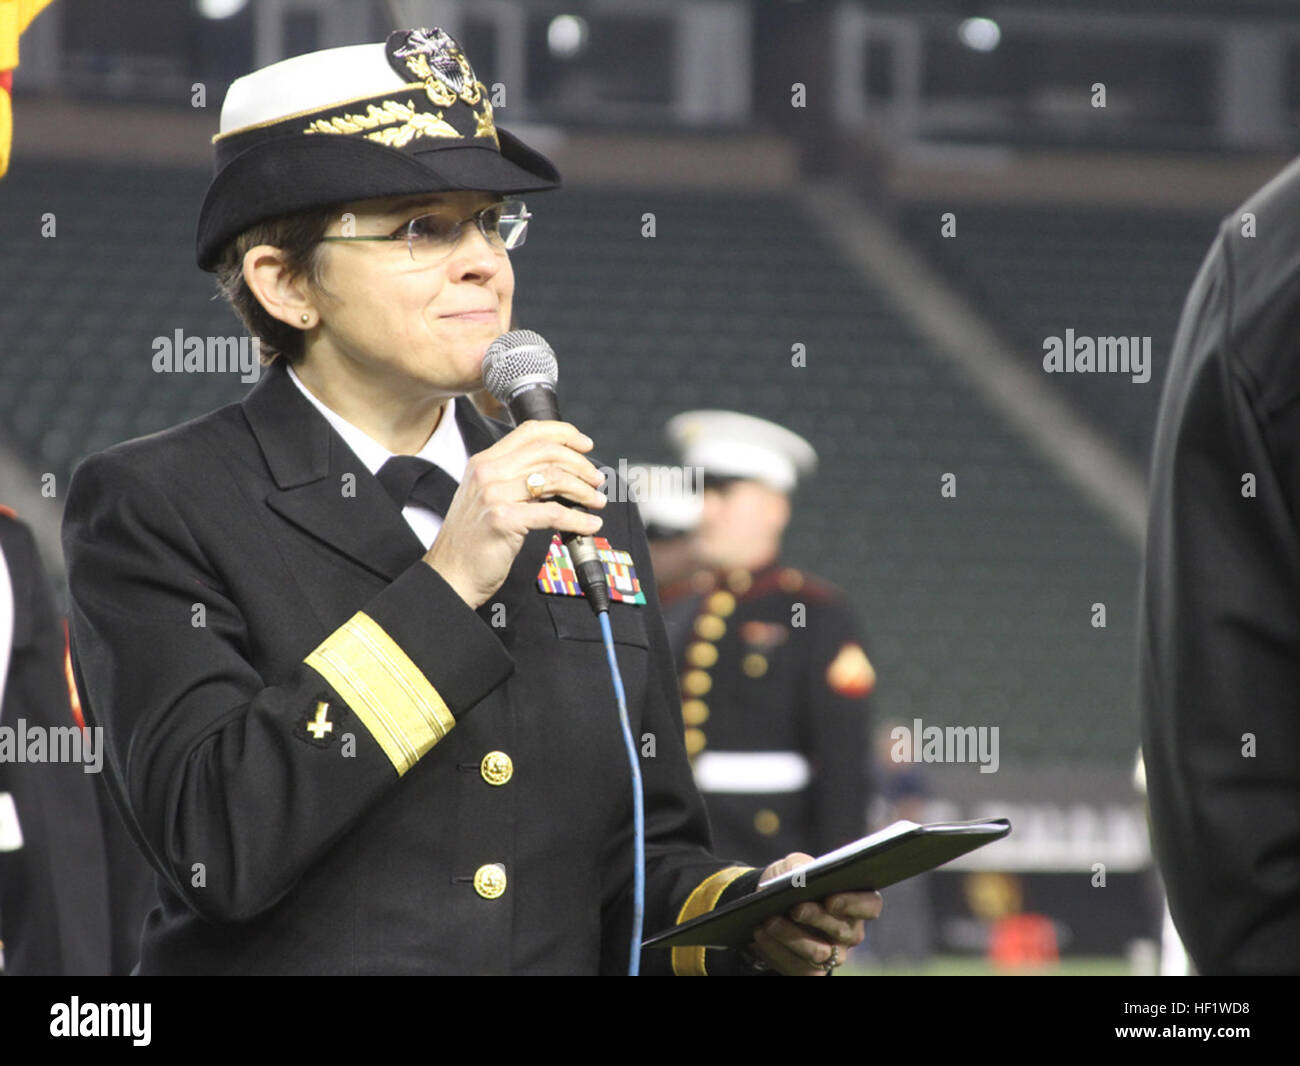 Rear Adm. Margaret Kibbin, the chaplain of the United States Marine Corps, delivers the invocation before the Semper Fidelis All-American Bowl at The StubHub Center in Carson, Calif., Jan. 5, 2014. The Semper Fidelis Football Program brought together over 90 of the best high-school football players in an East versus West game and is an opportunity for the Marine Corps to connect on a personal and local level with players and influencers, demonstrates commitment to developing quality citizens, and reinforces how core values of honor, courage and commitment relate to success on and off the field Stock Photo